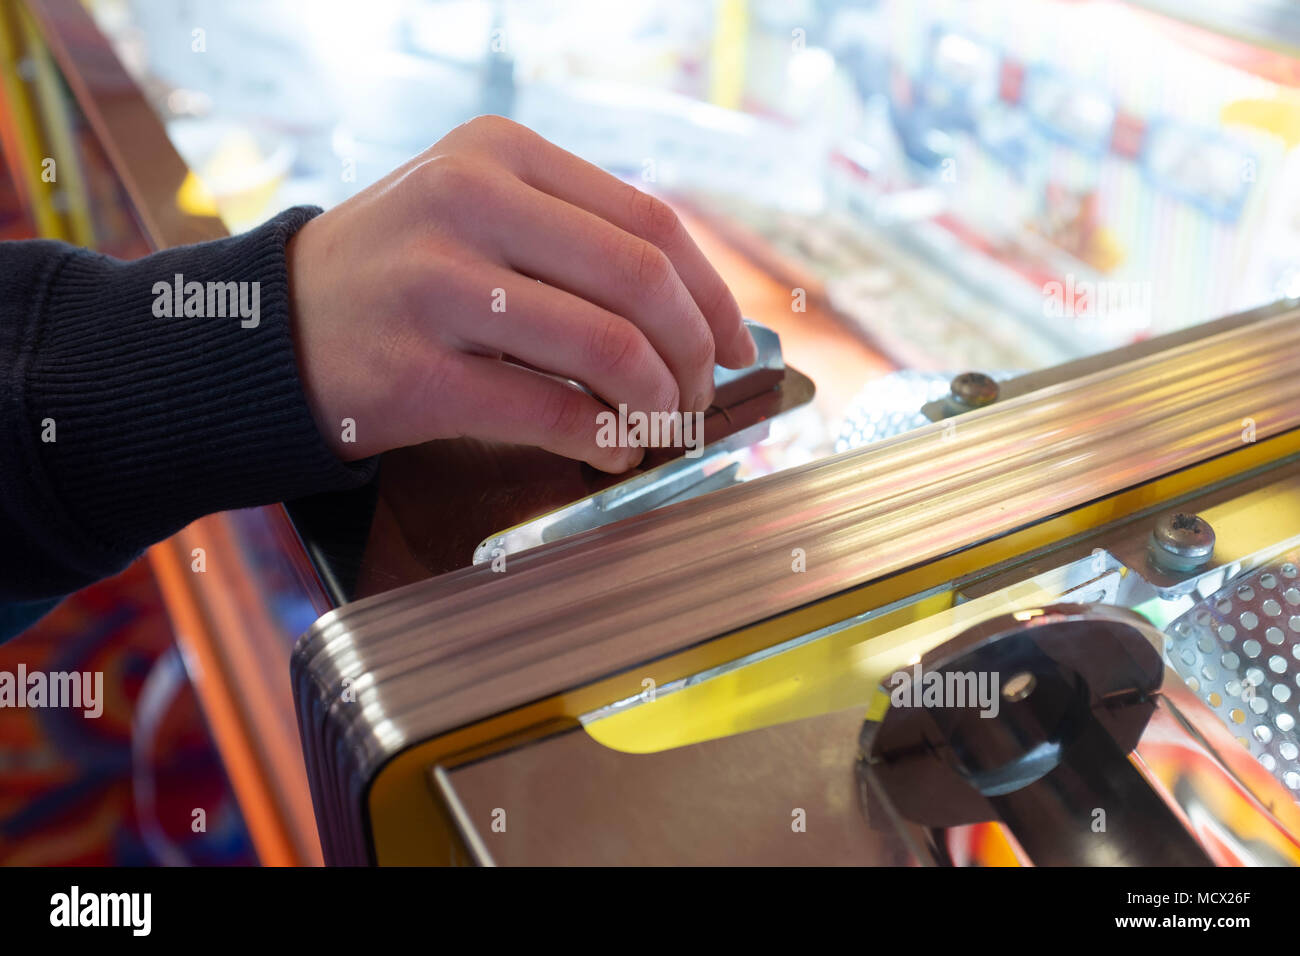 Playing slot machines at the amusement arcades in Skegness, UK Stock Photo